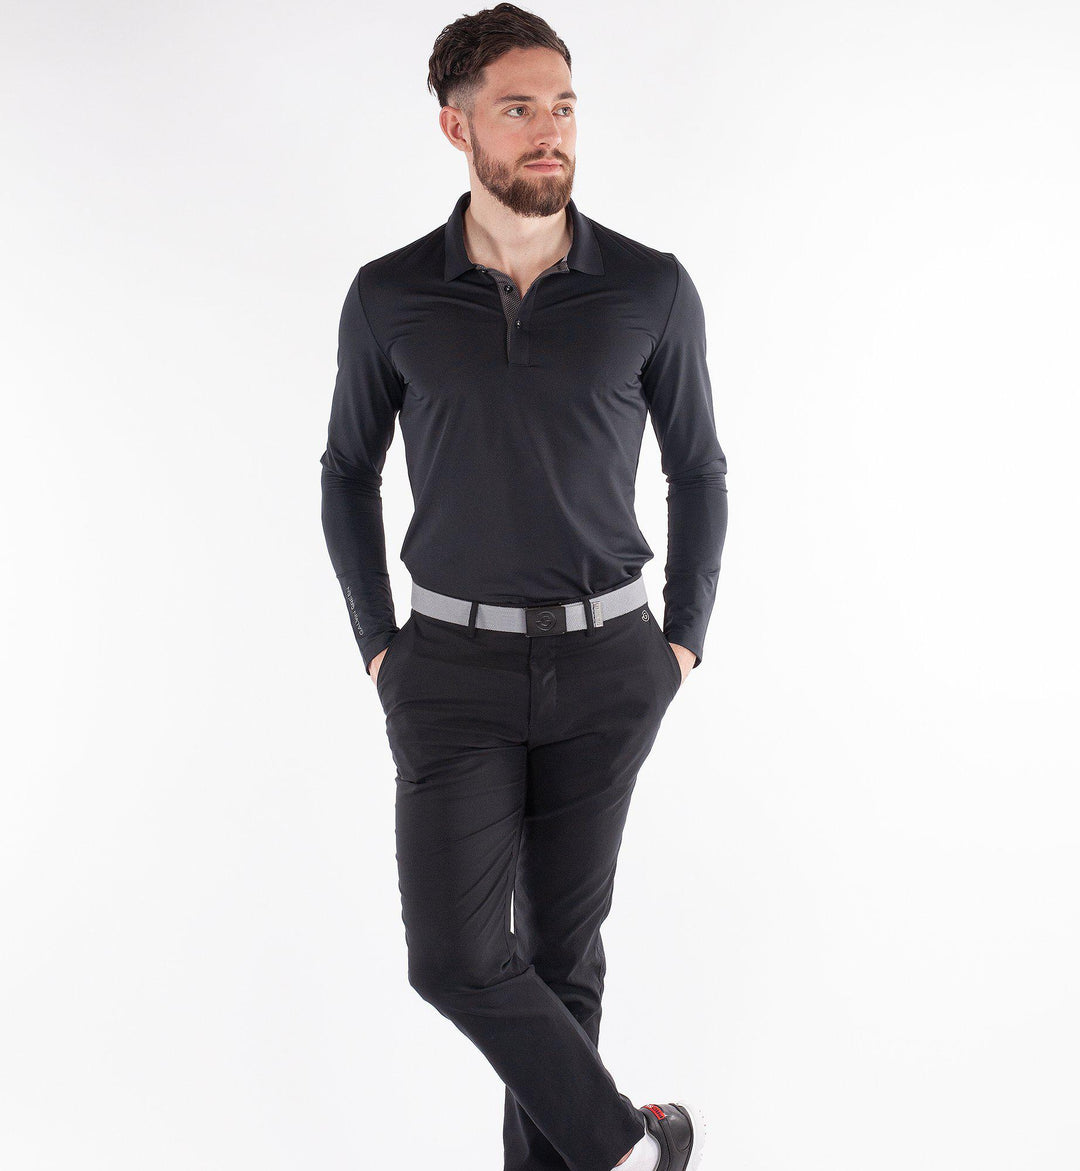 Marwin is a Breathable long sleeve golf shirt for Men in the color Black(2)